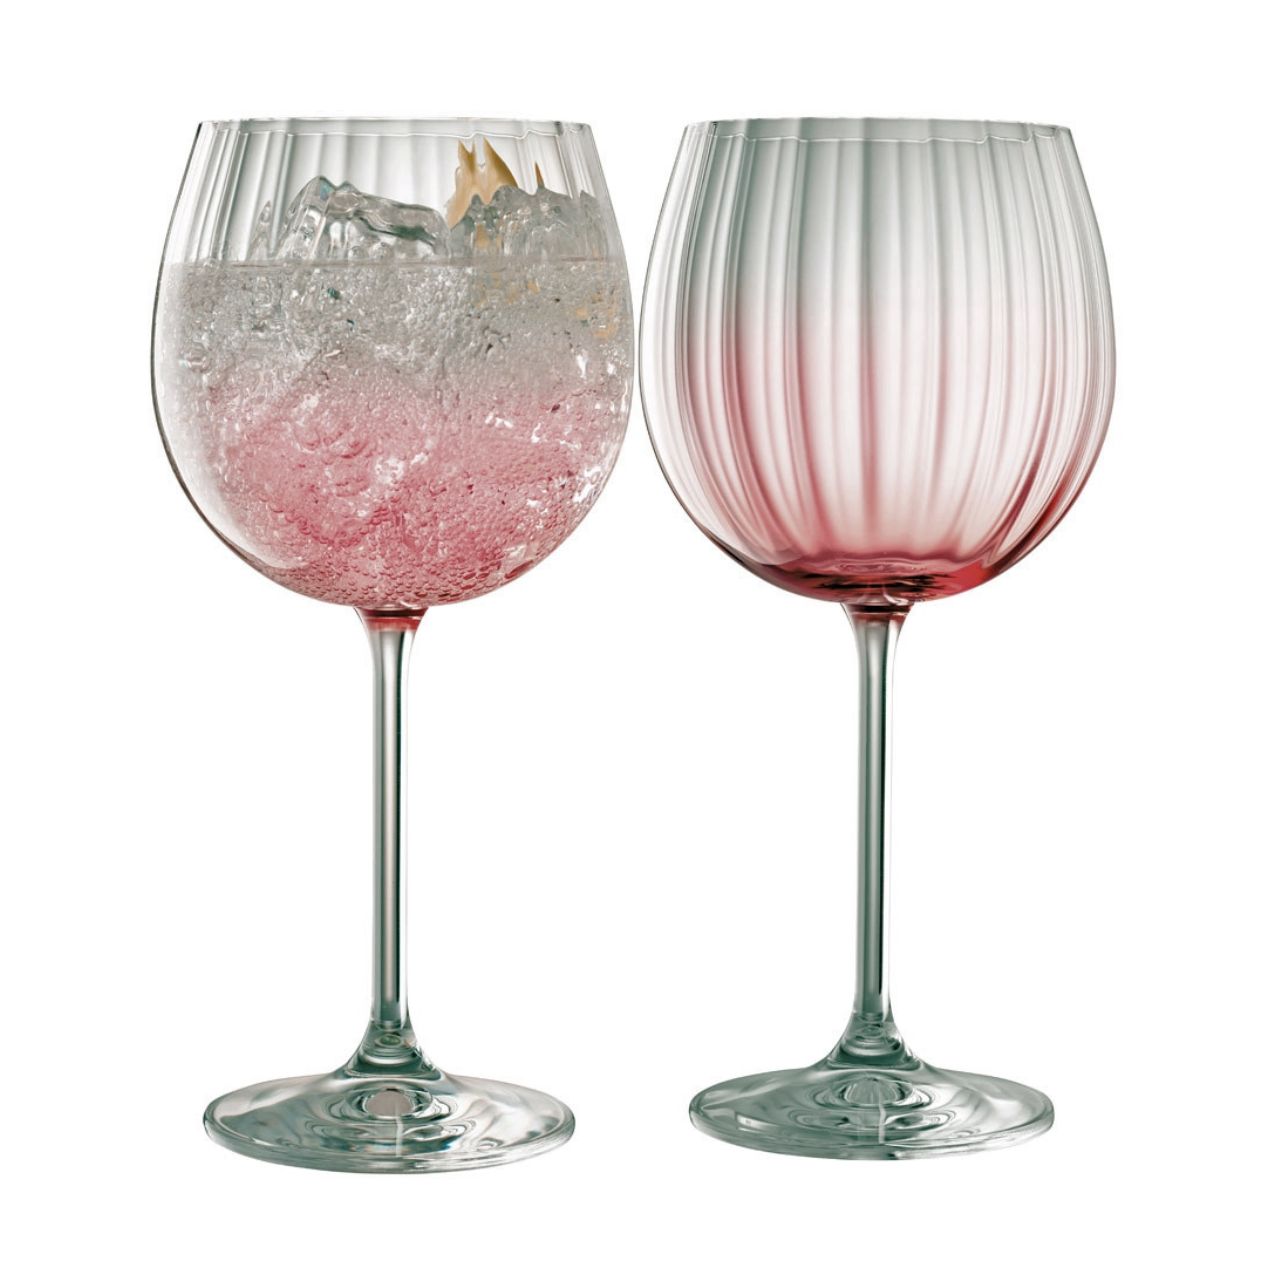 Galway Crystal Erne Gin & Tonic Glass Pair Blush  Blush colour Gin and Tonic glasses in the Erne suite from Galway Irish Crystal. Beautiful large balloon gin glasses with an elegant lines design in a light blush colour. The glass has been designed to add a splash of colour and light design to a stunning gin glass.